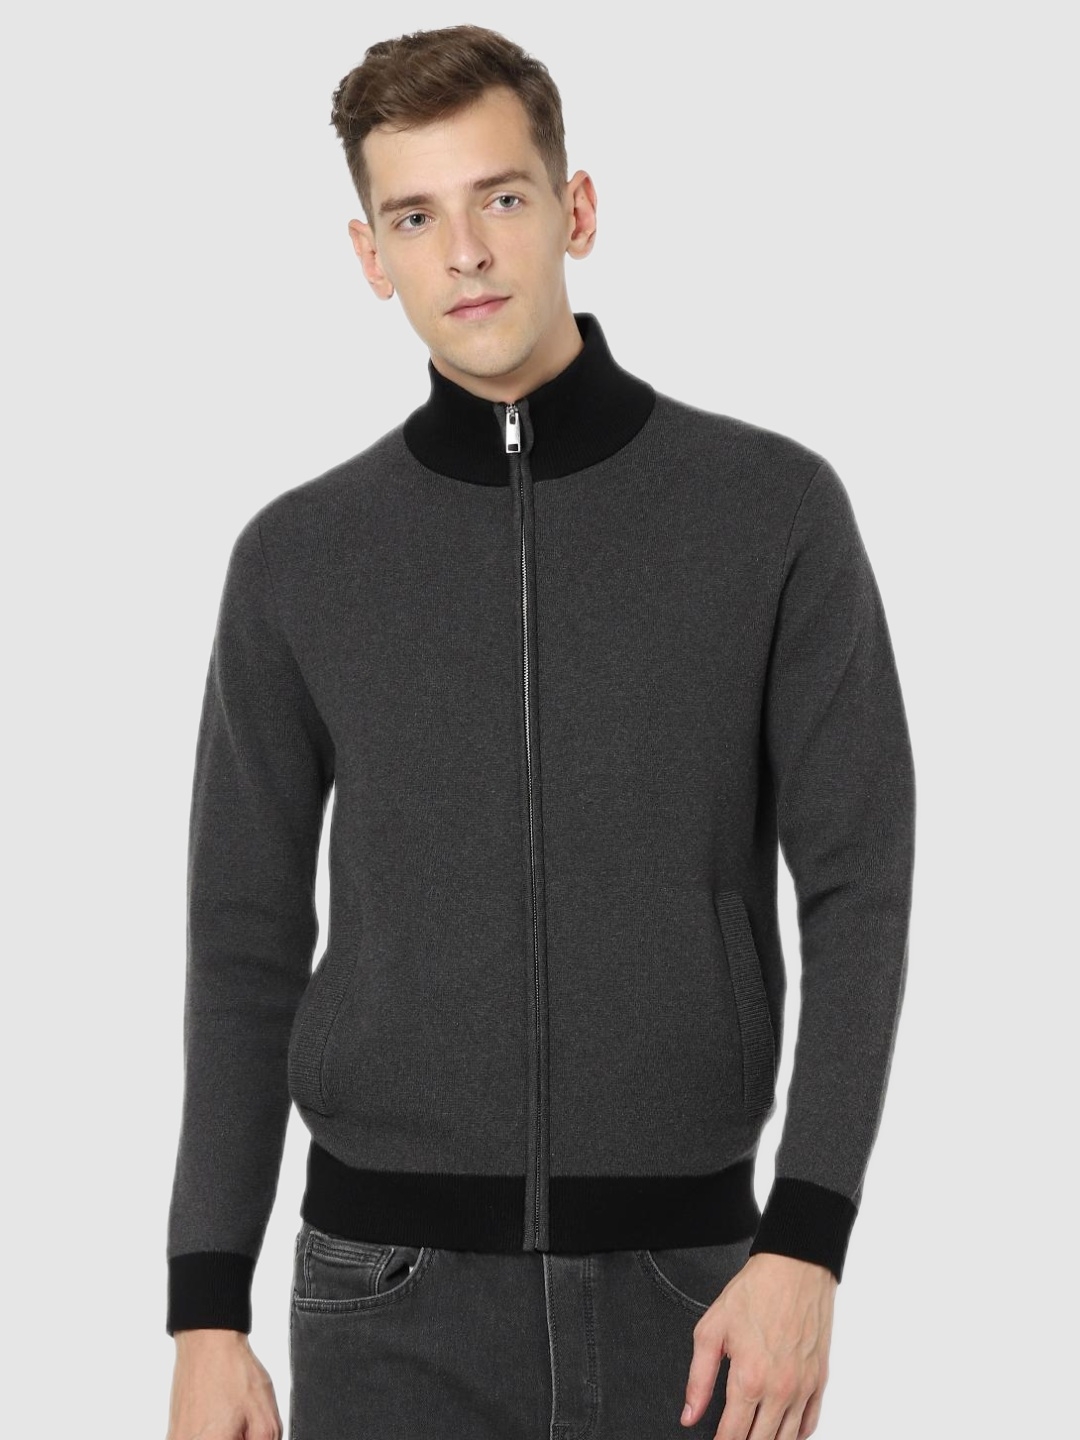 Celio Charcoal-Grey Solid Regular Fit Sweater